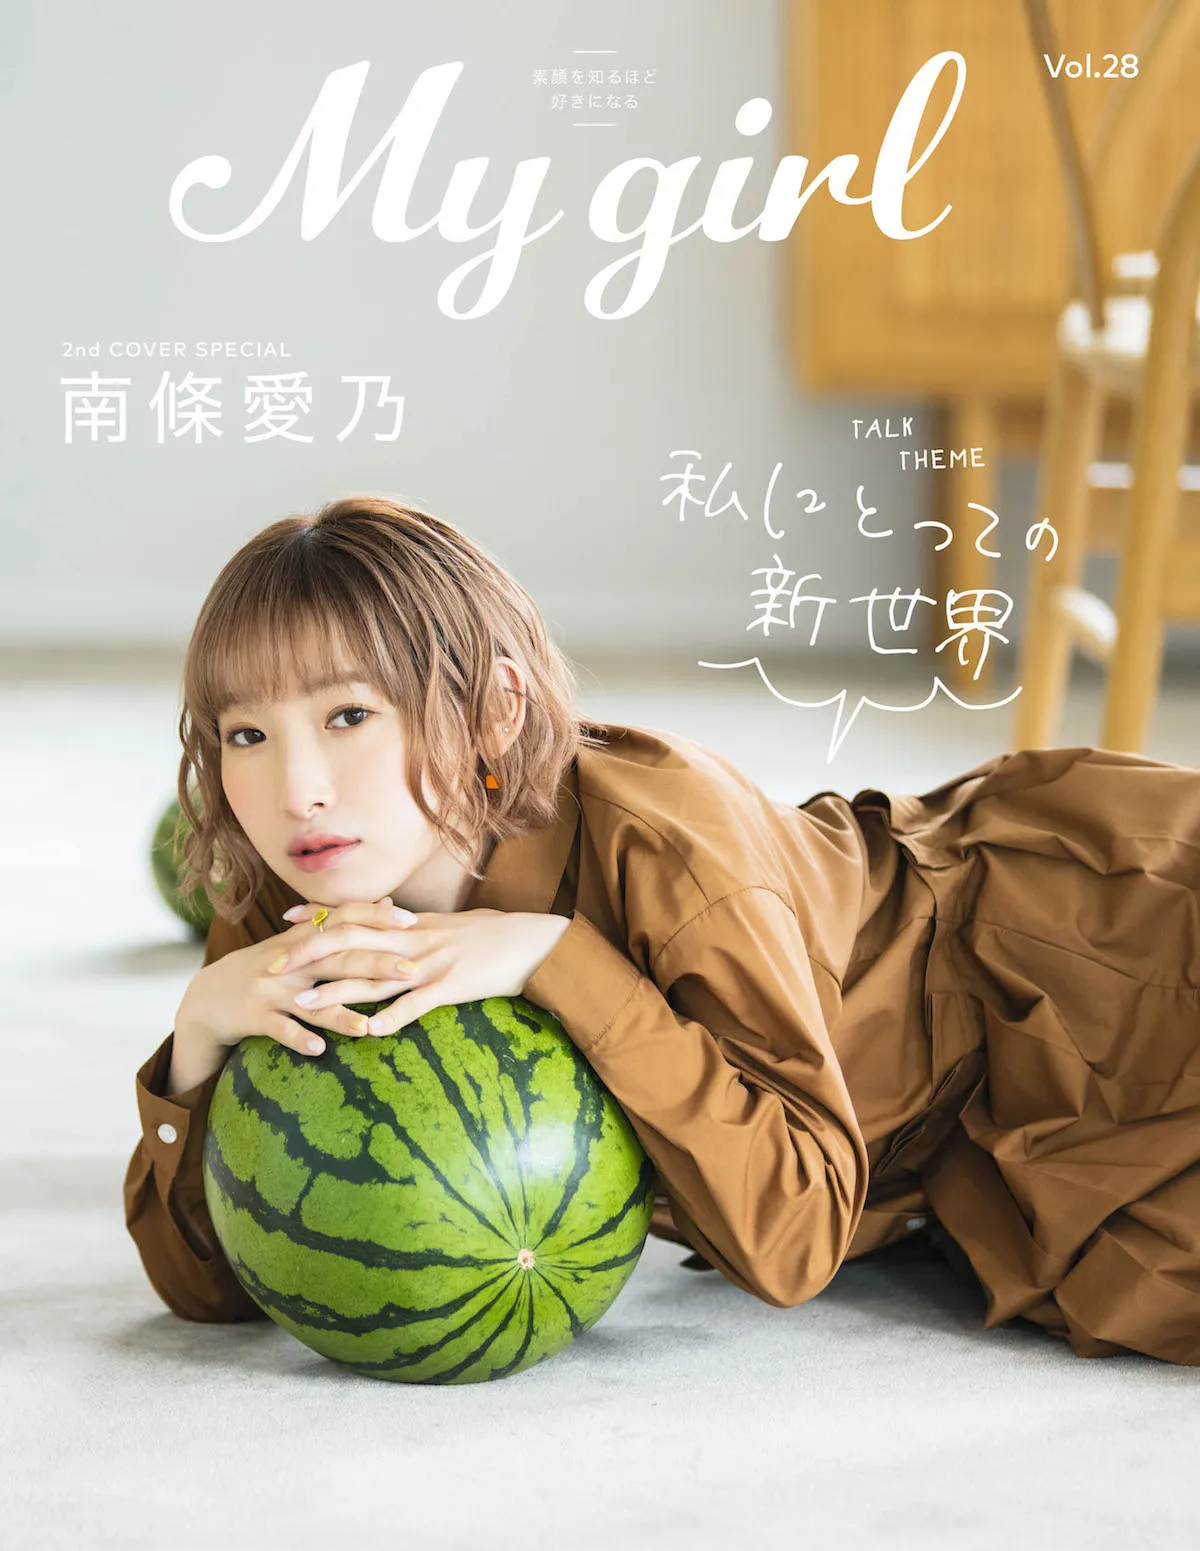 「My Girl vol.28」2nd Cover Special / 南條愛乃